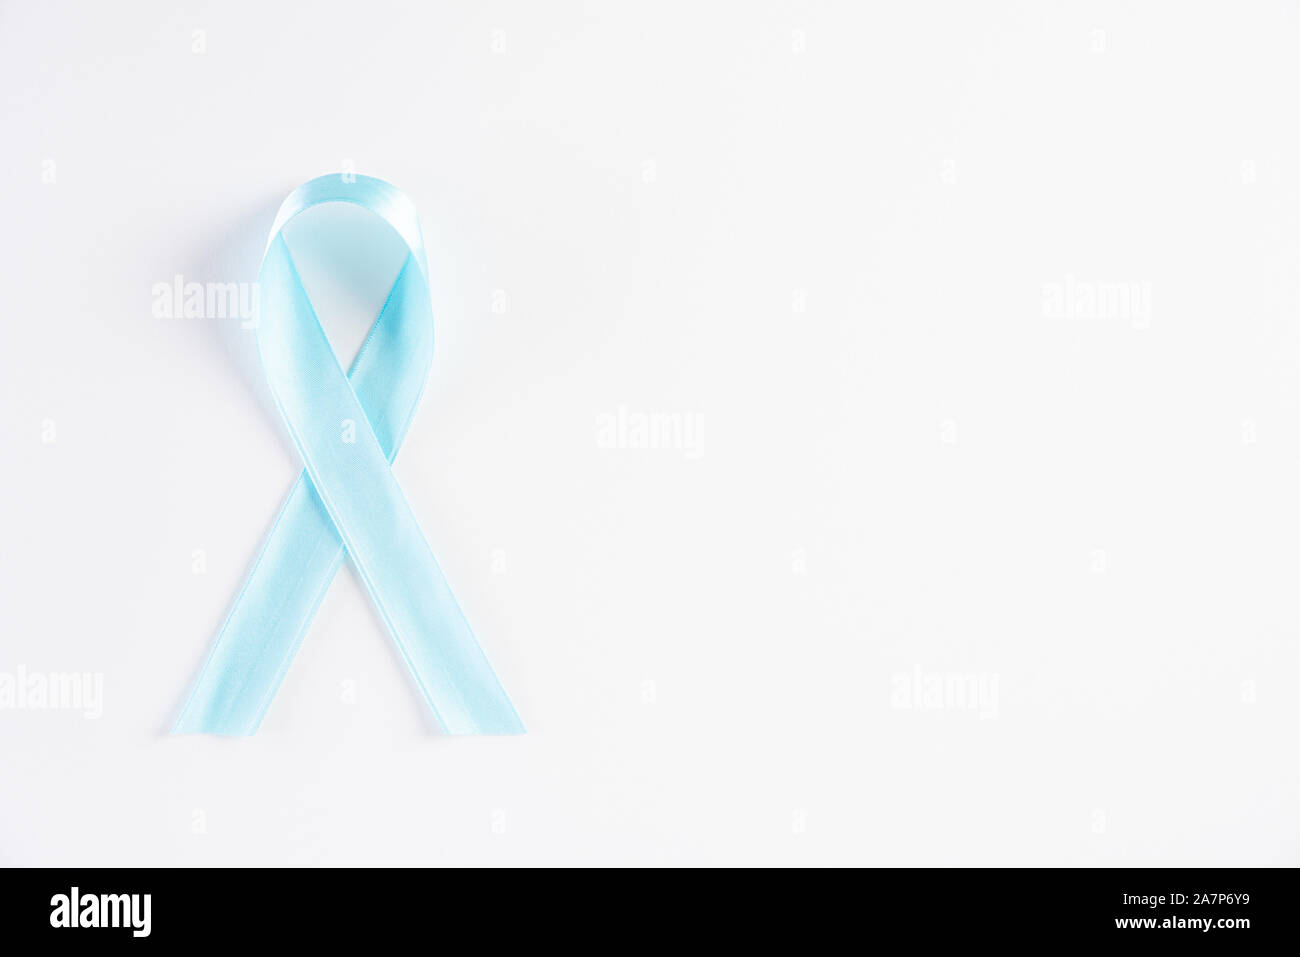 Blue ribbon on white background representing an annual event during the month of November to raise awareness of men's health issues and prostate cance Stock Photo